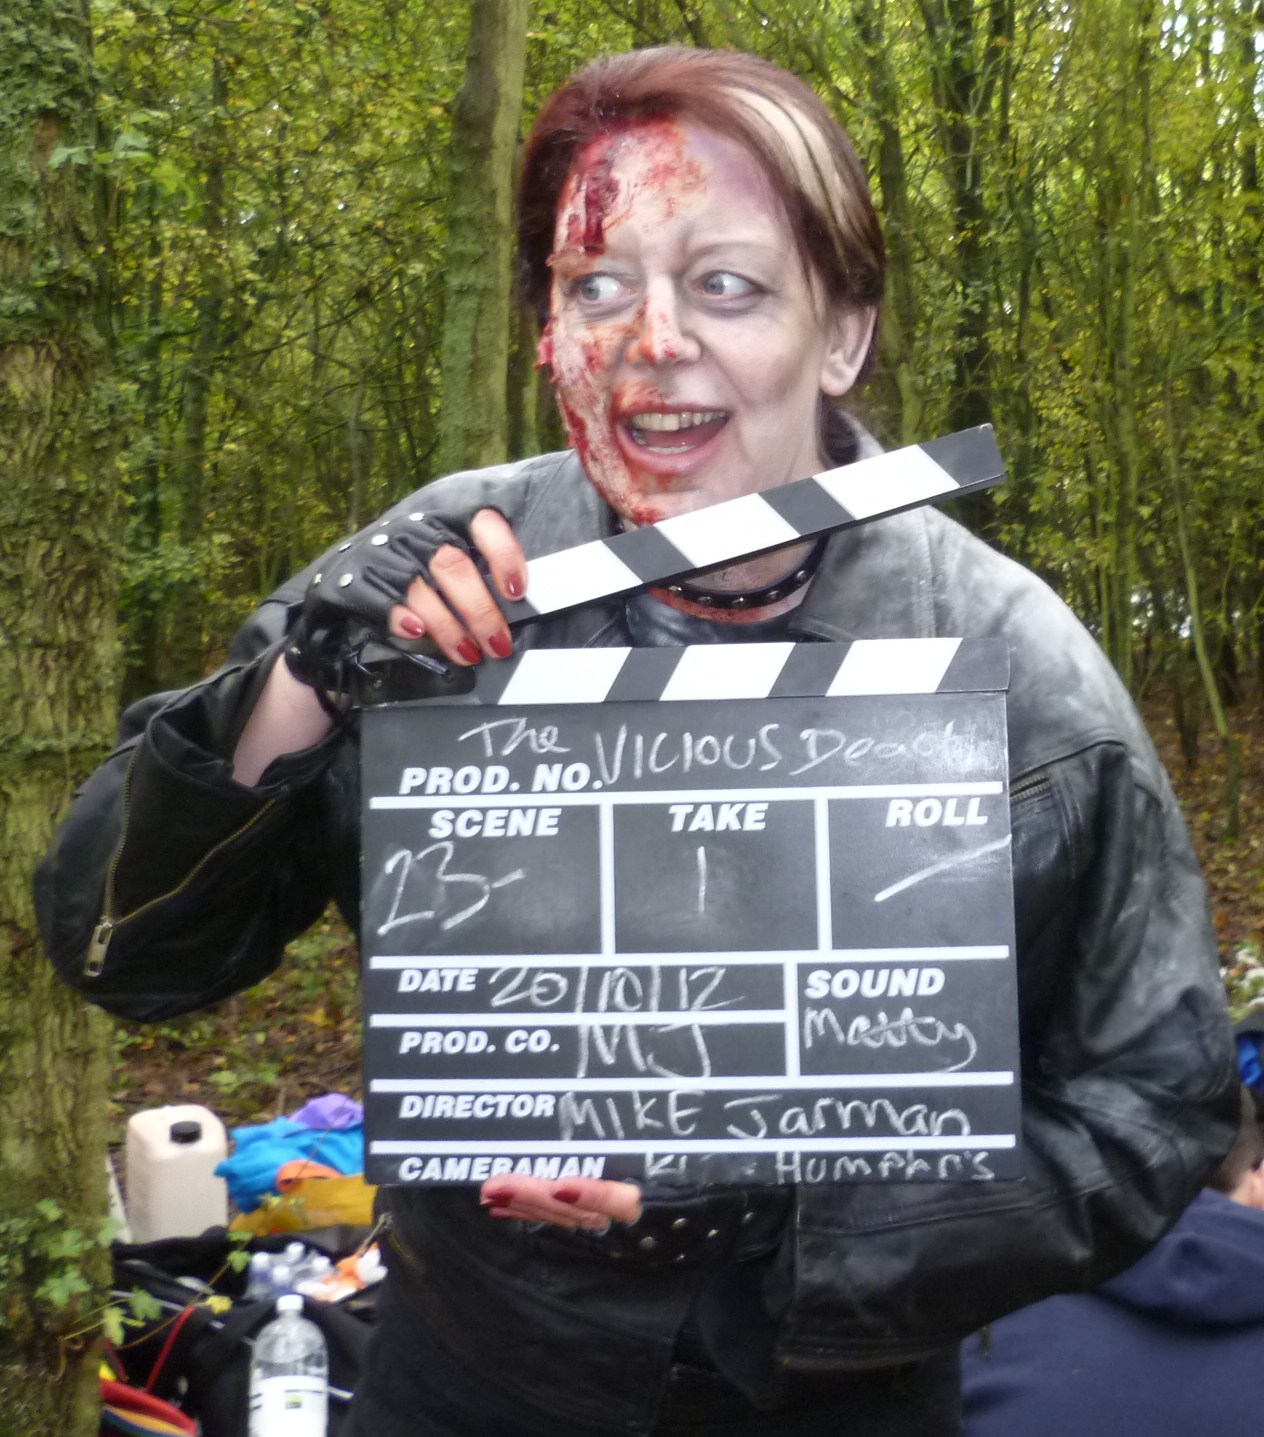 On set of 'The Vicious dead' feature film